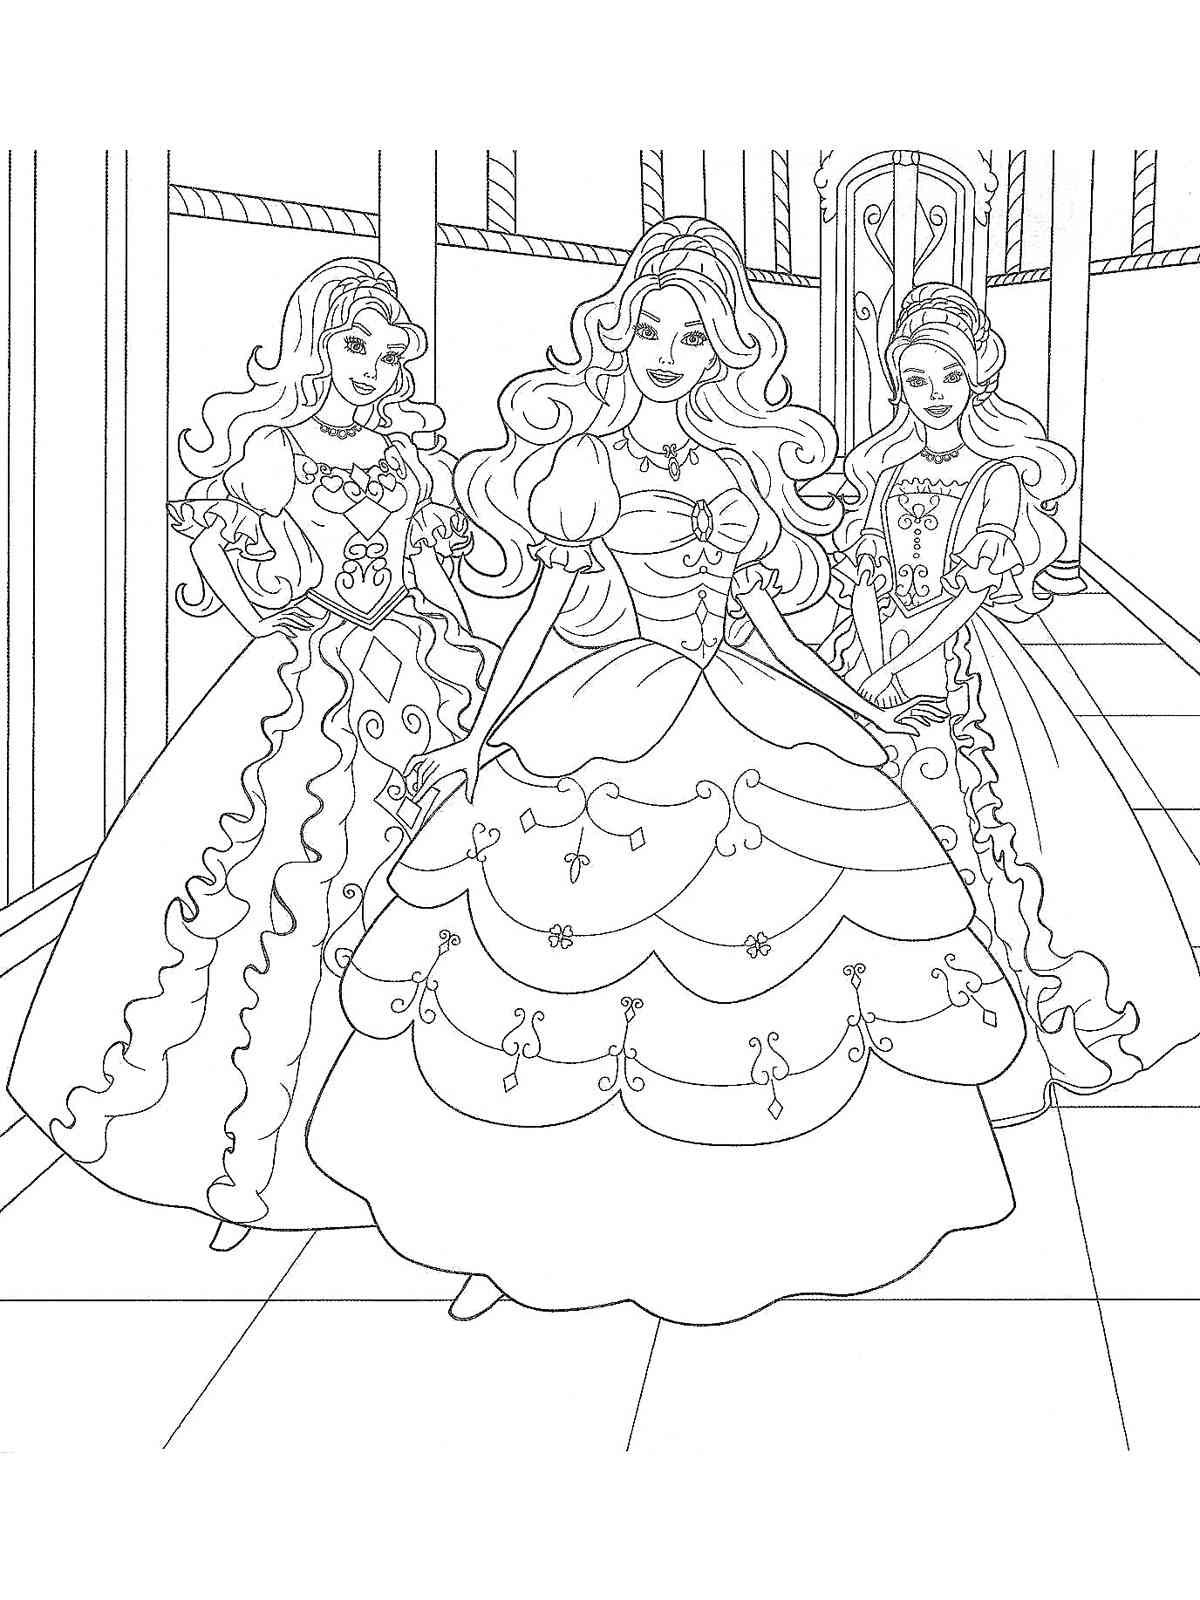 Princess Barbie at the Ball coloring page